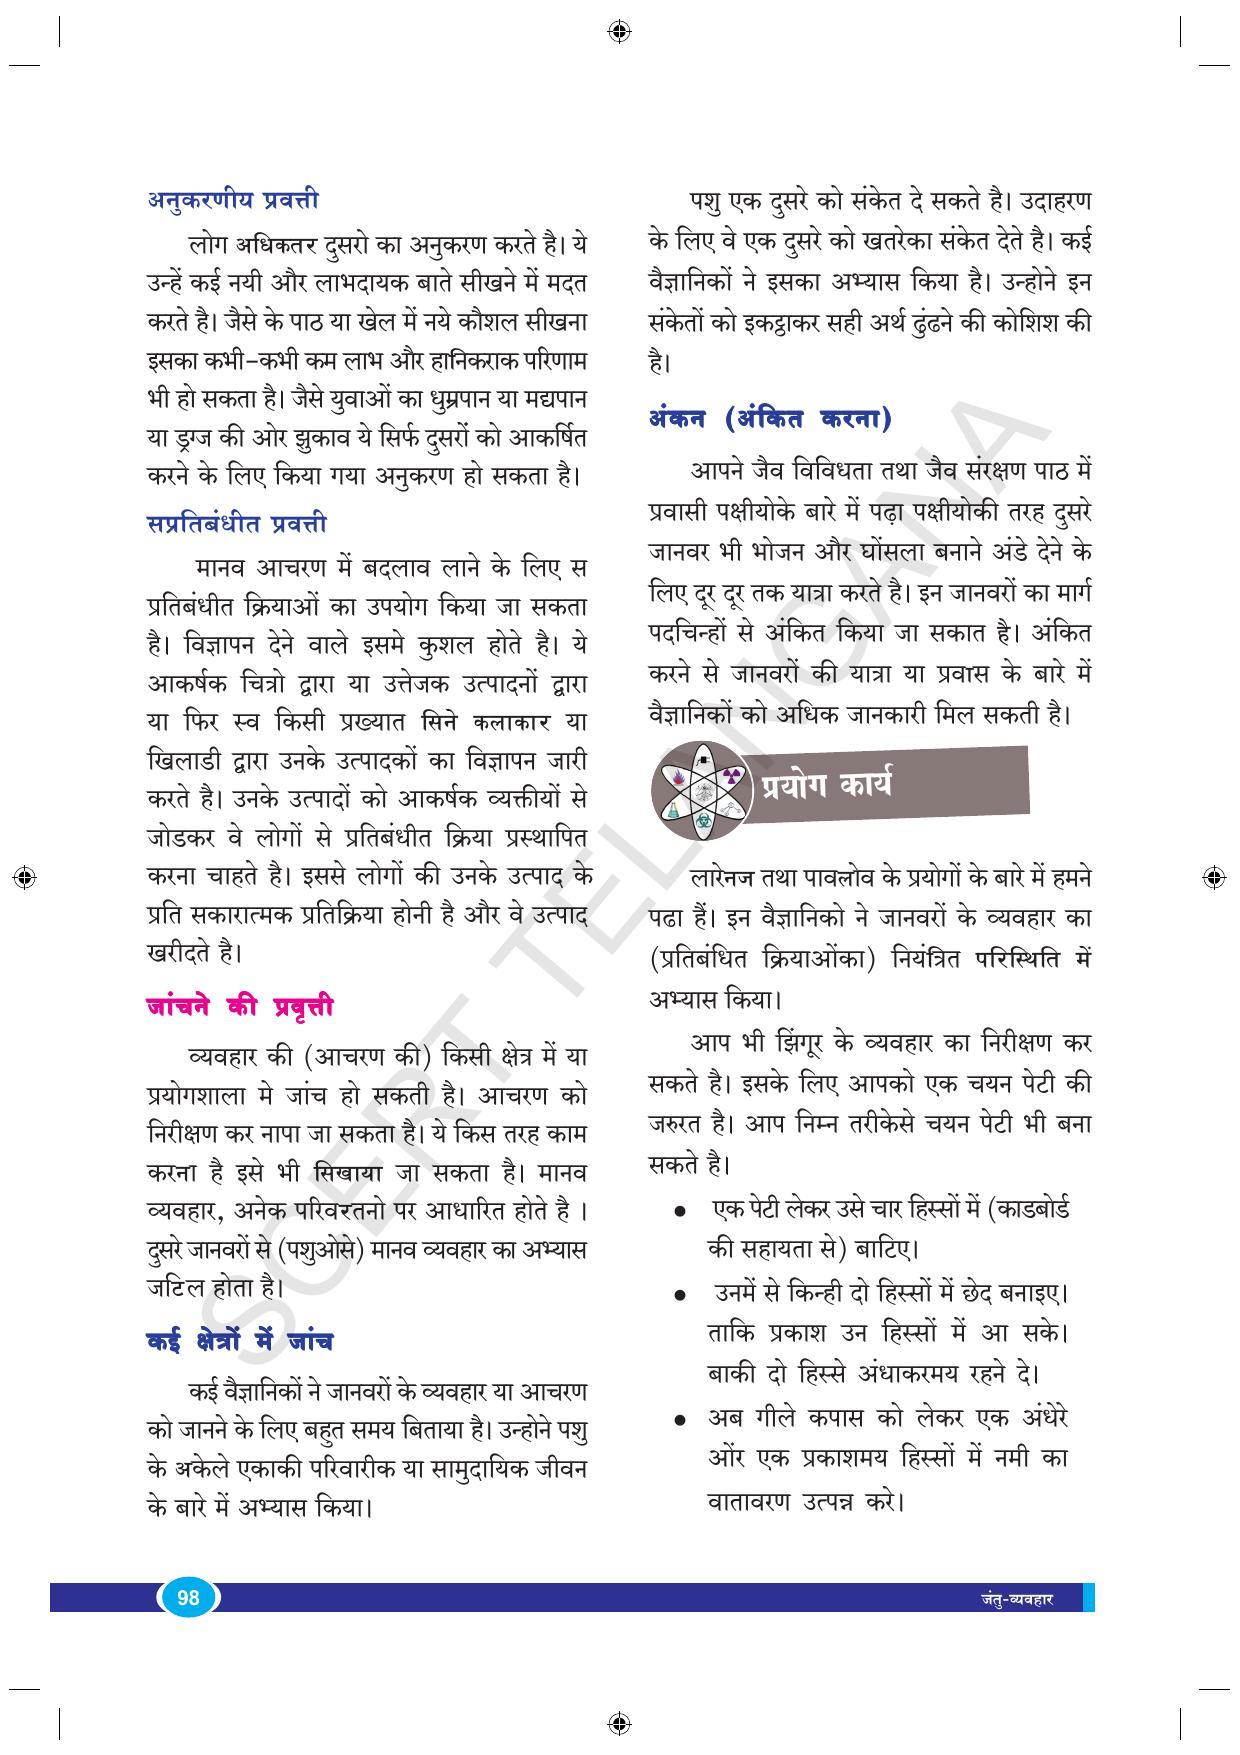 TS SCERT Class 9 Biological Science (Hindi Medium) Text Book - Page 110